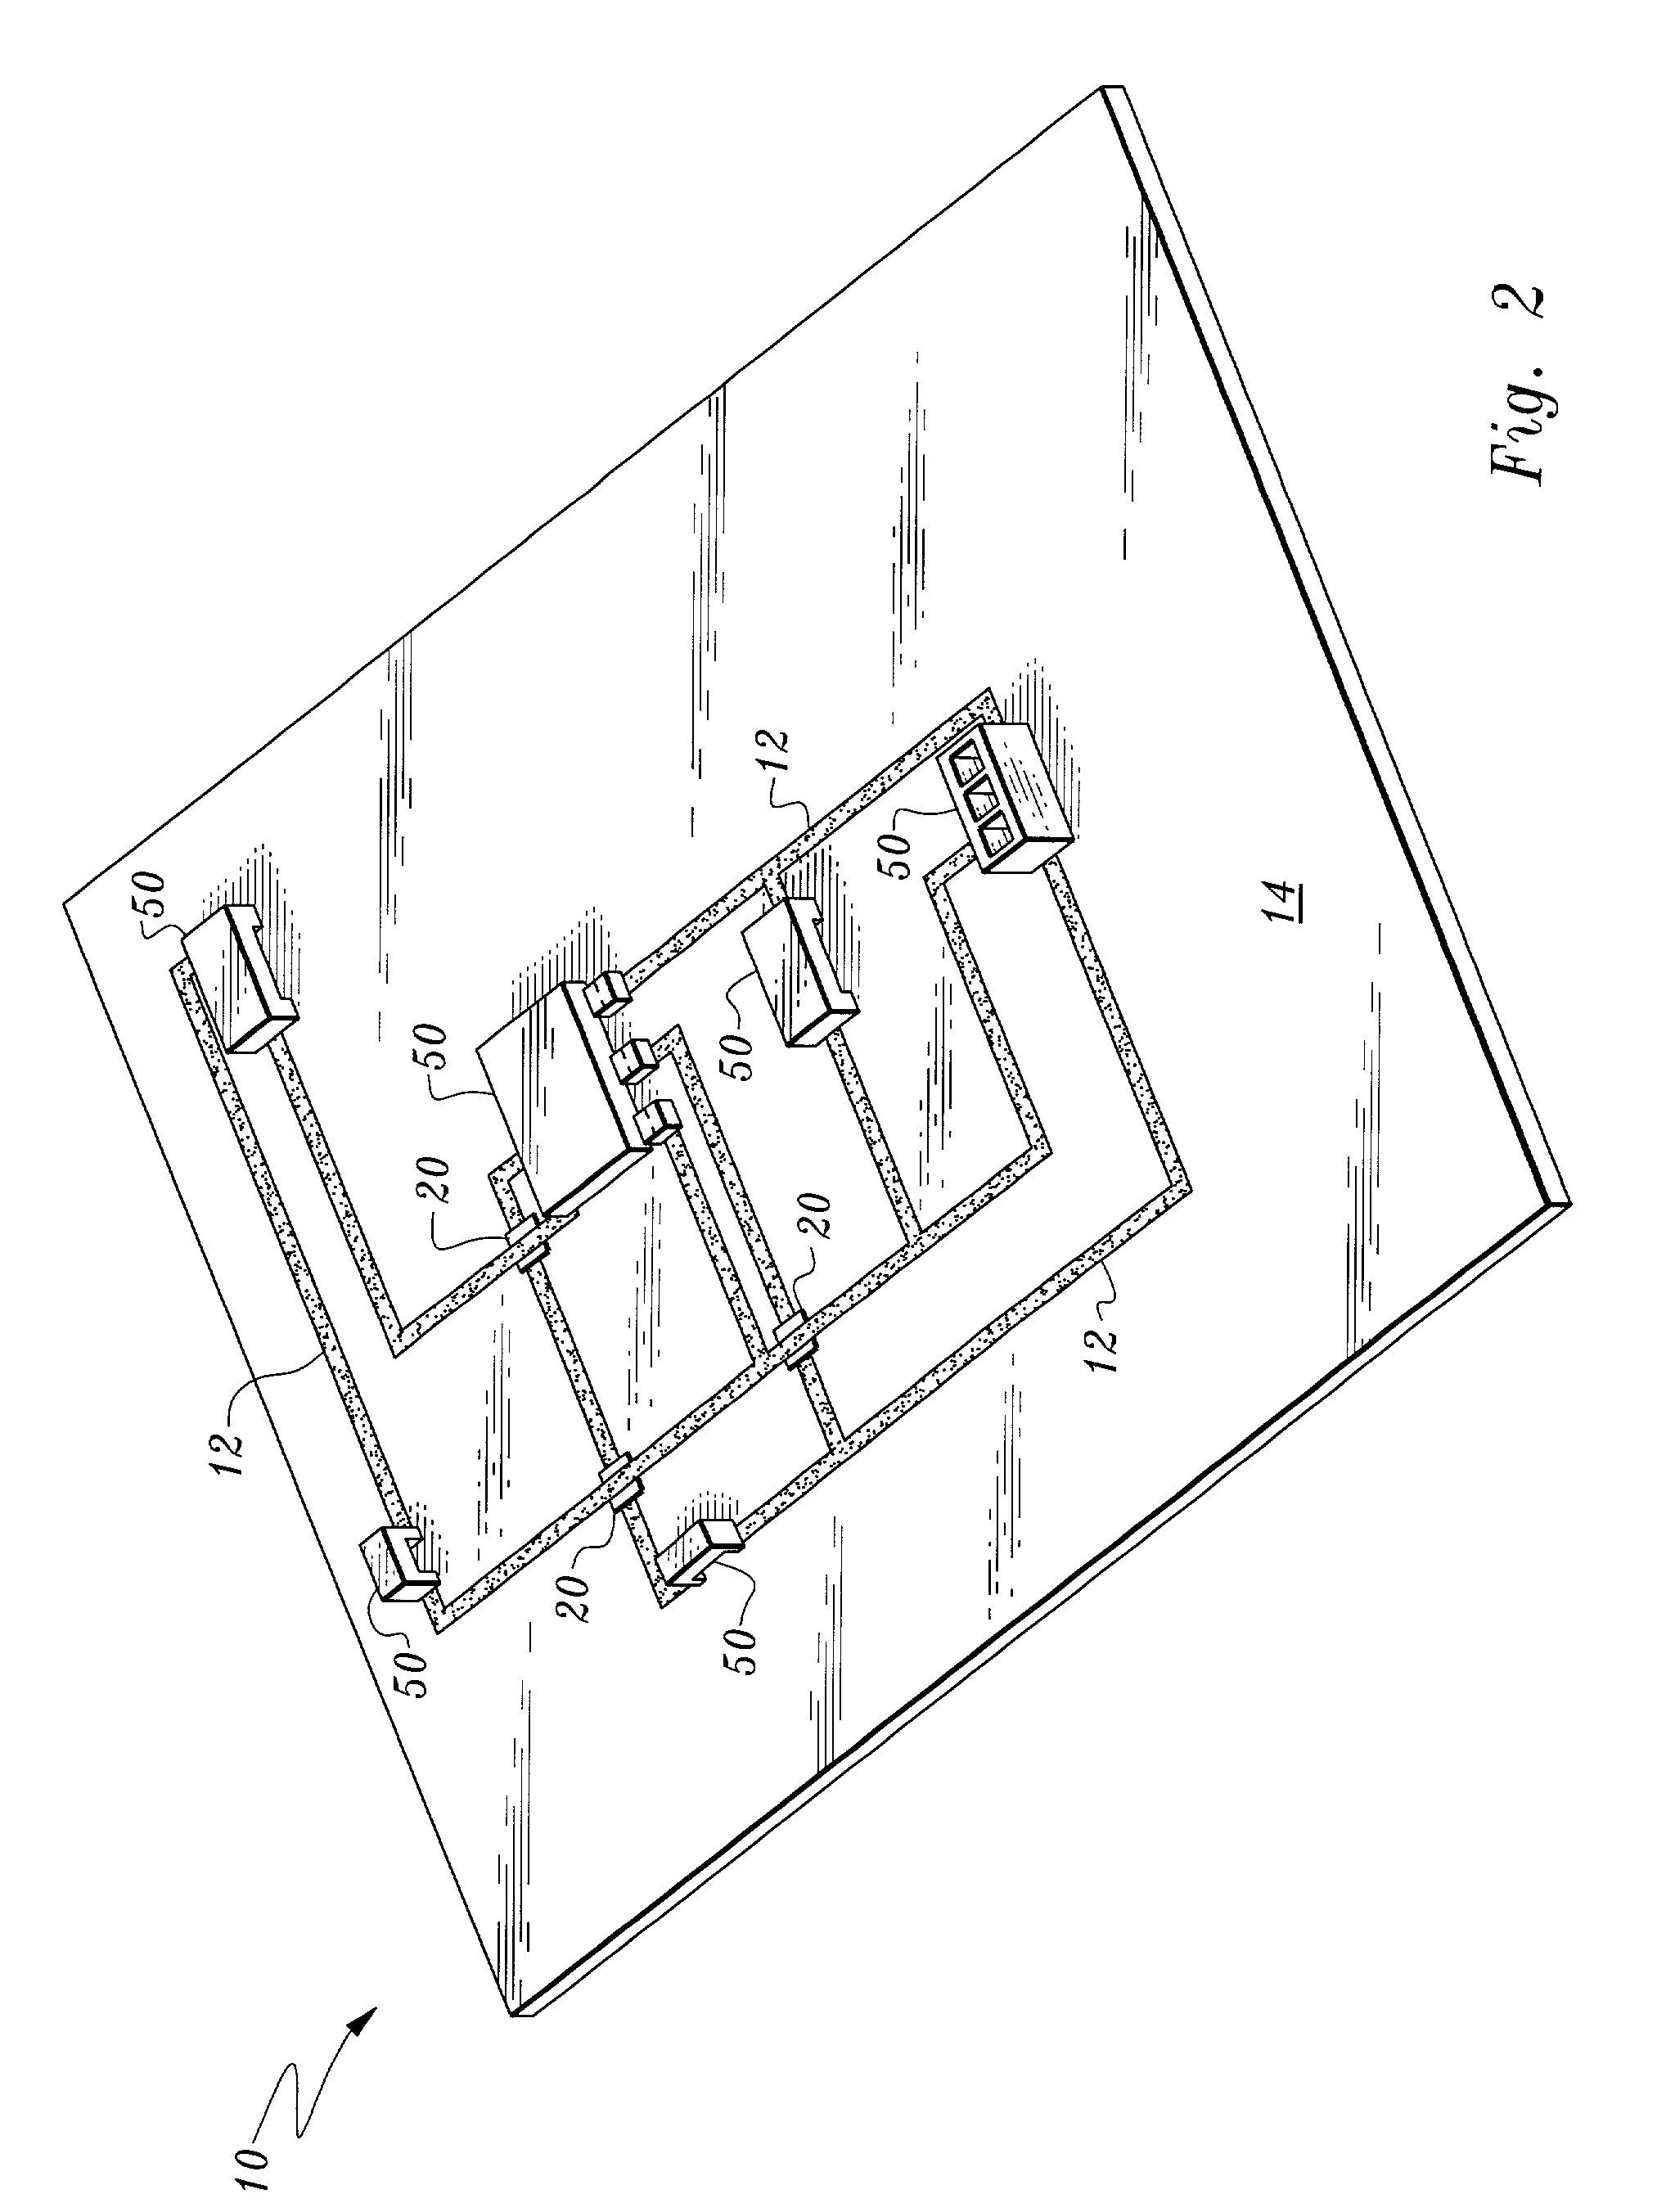 Water-soluble electrically conductive composition, modifications, and applications thereof